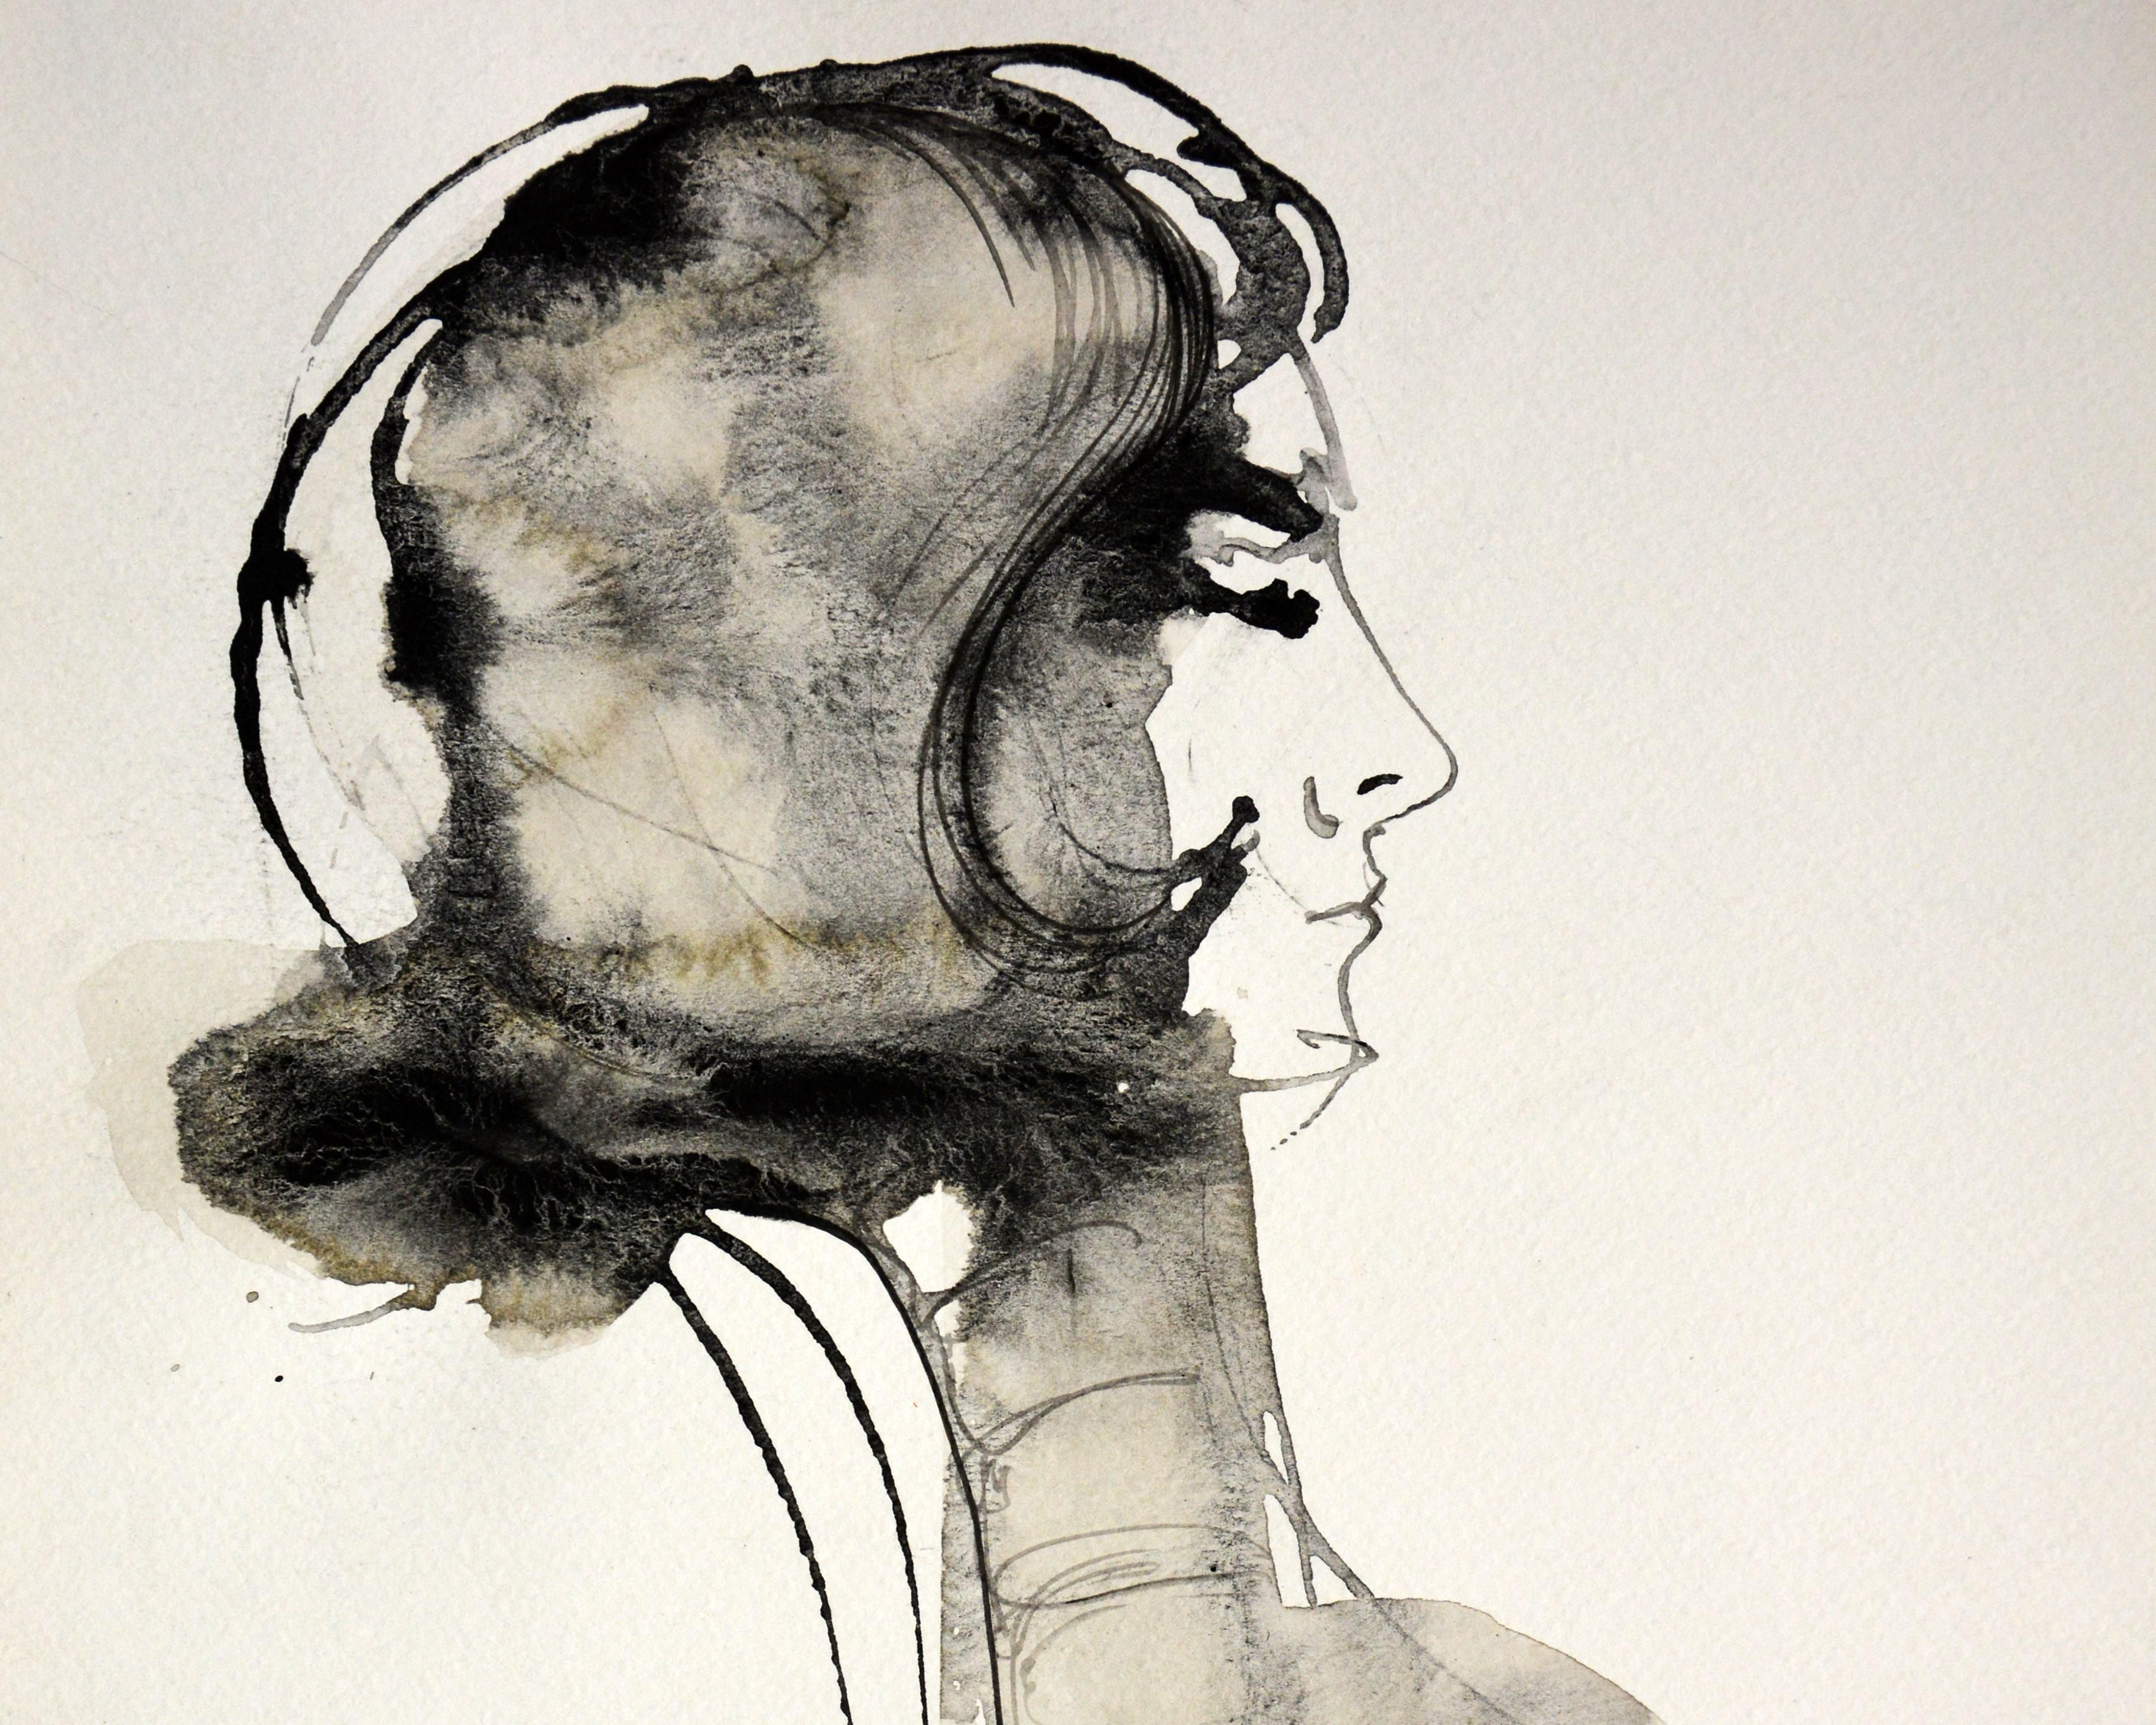 Luis Miguel Valdes (Cuba, 1949)
'Perfil 2', 1999
ink on paper
15.8 x 11.9 in. (40 x 30 cm.)
ID: 1D199912
Hand-signed by author
______________________________________________
Biography
Born in Cuba in 1949, resides and works between Havana, Mexico